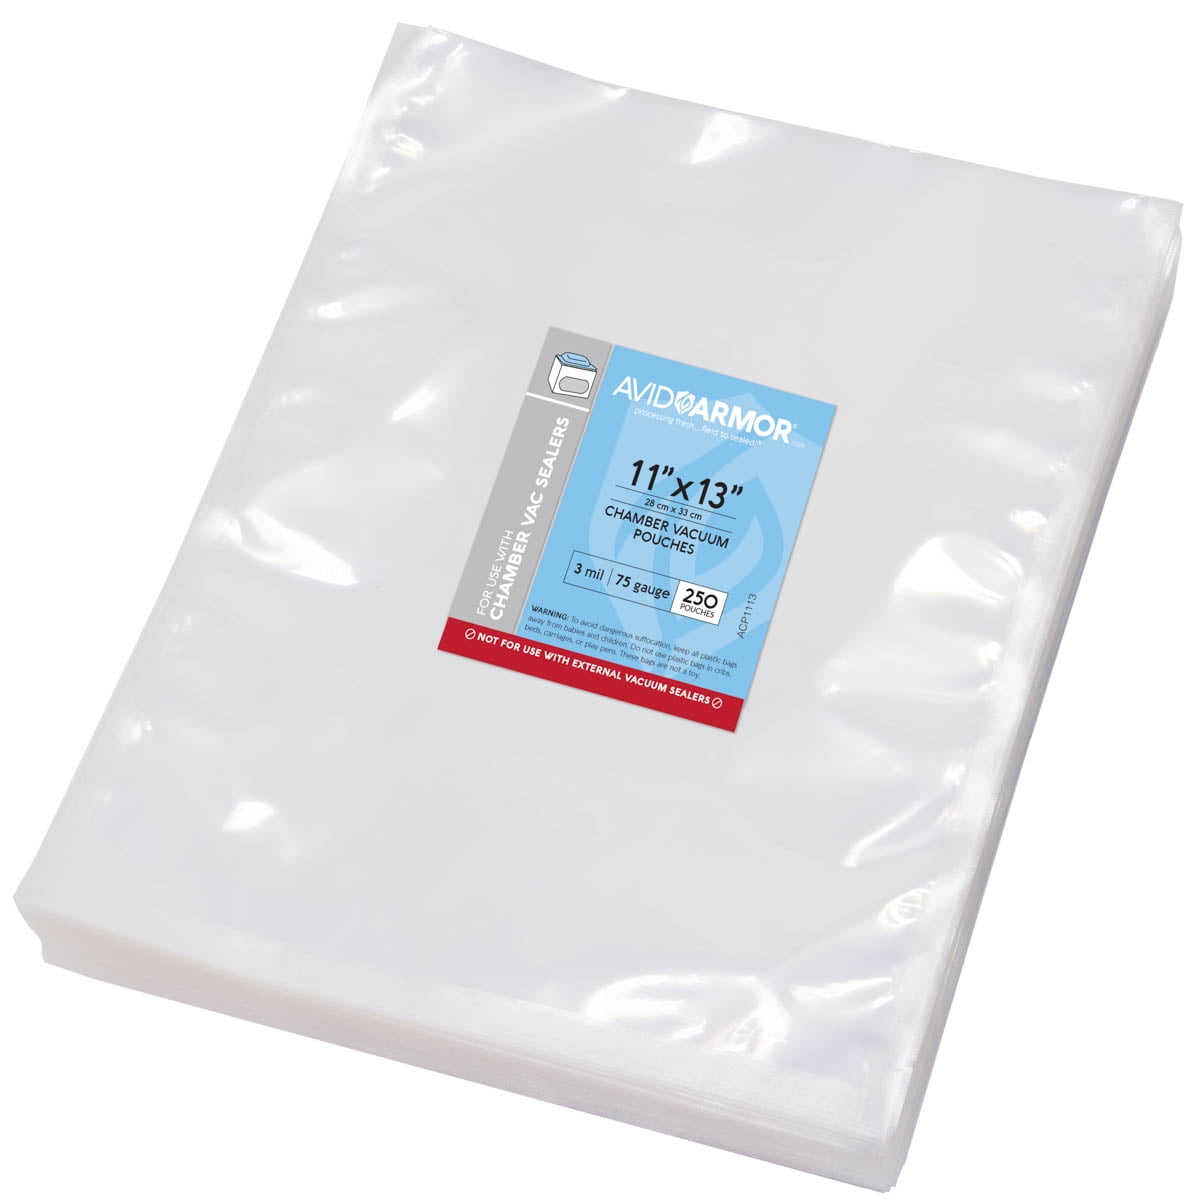 Food Vacuum Freezer Bags 100 Pre-Cut Combo Pack - 50 Quart Size 8x12 and Gallon 11x16 from Avid Armor